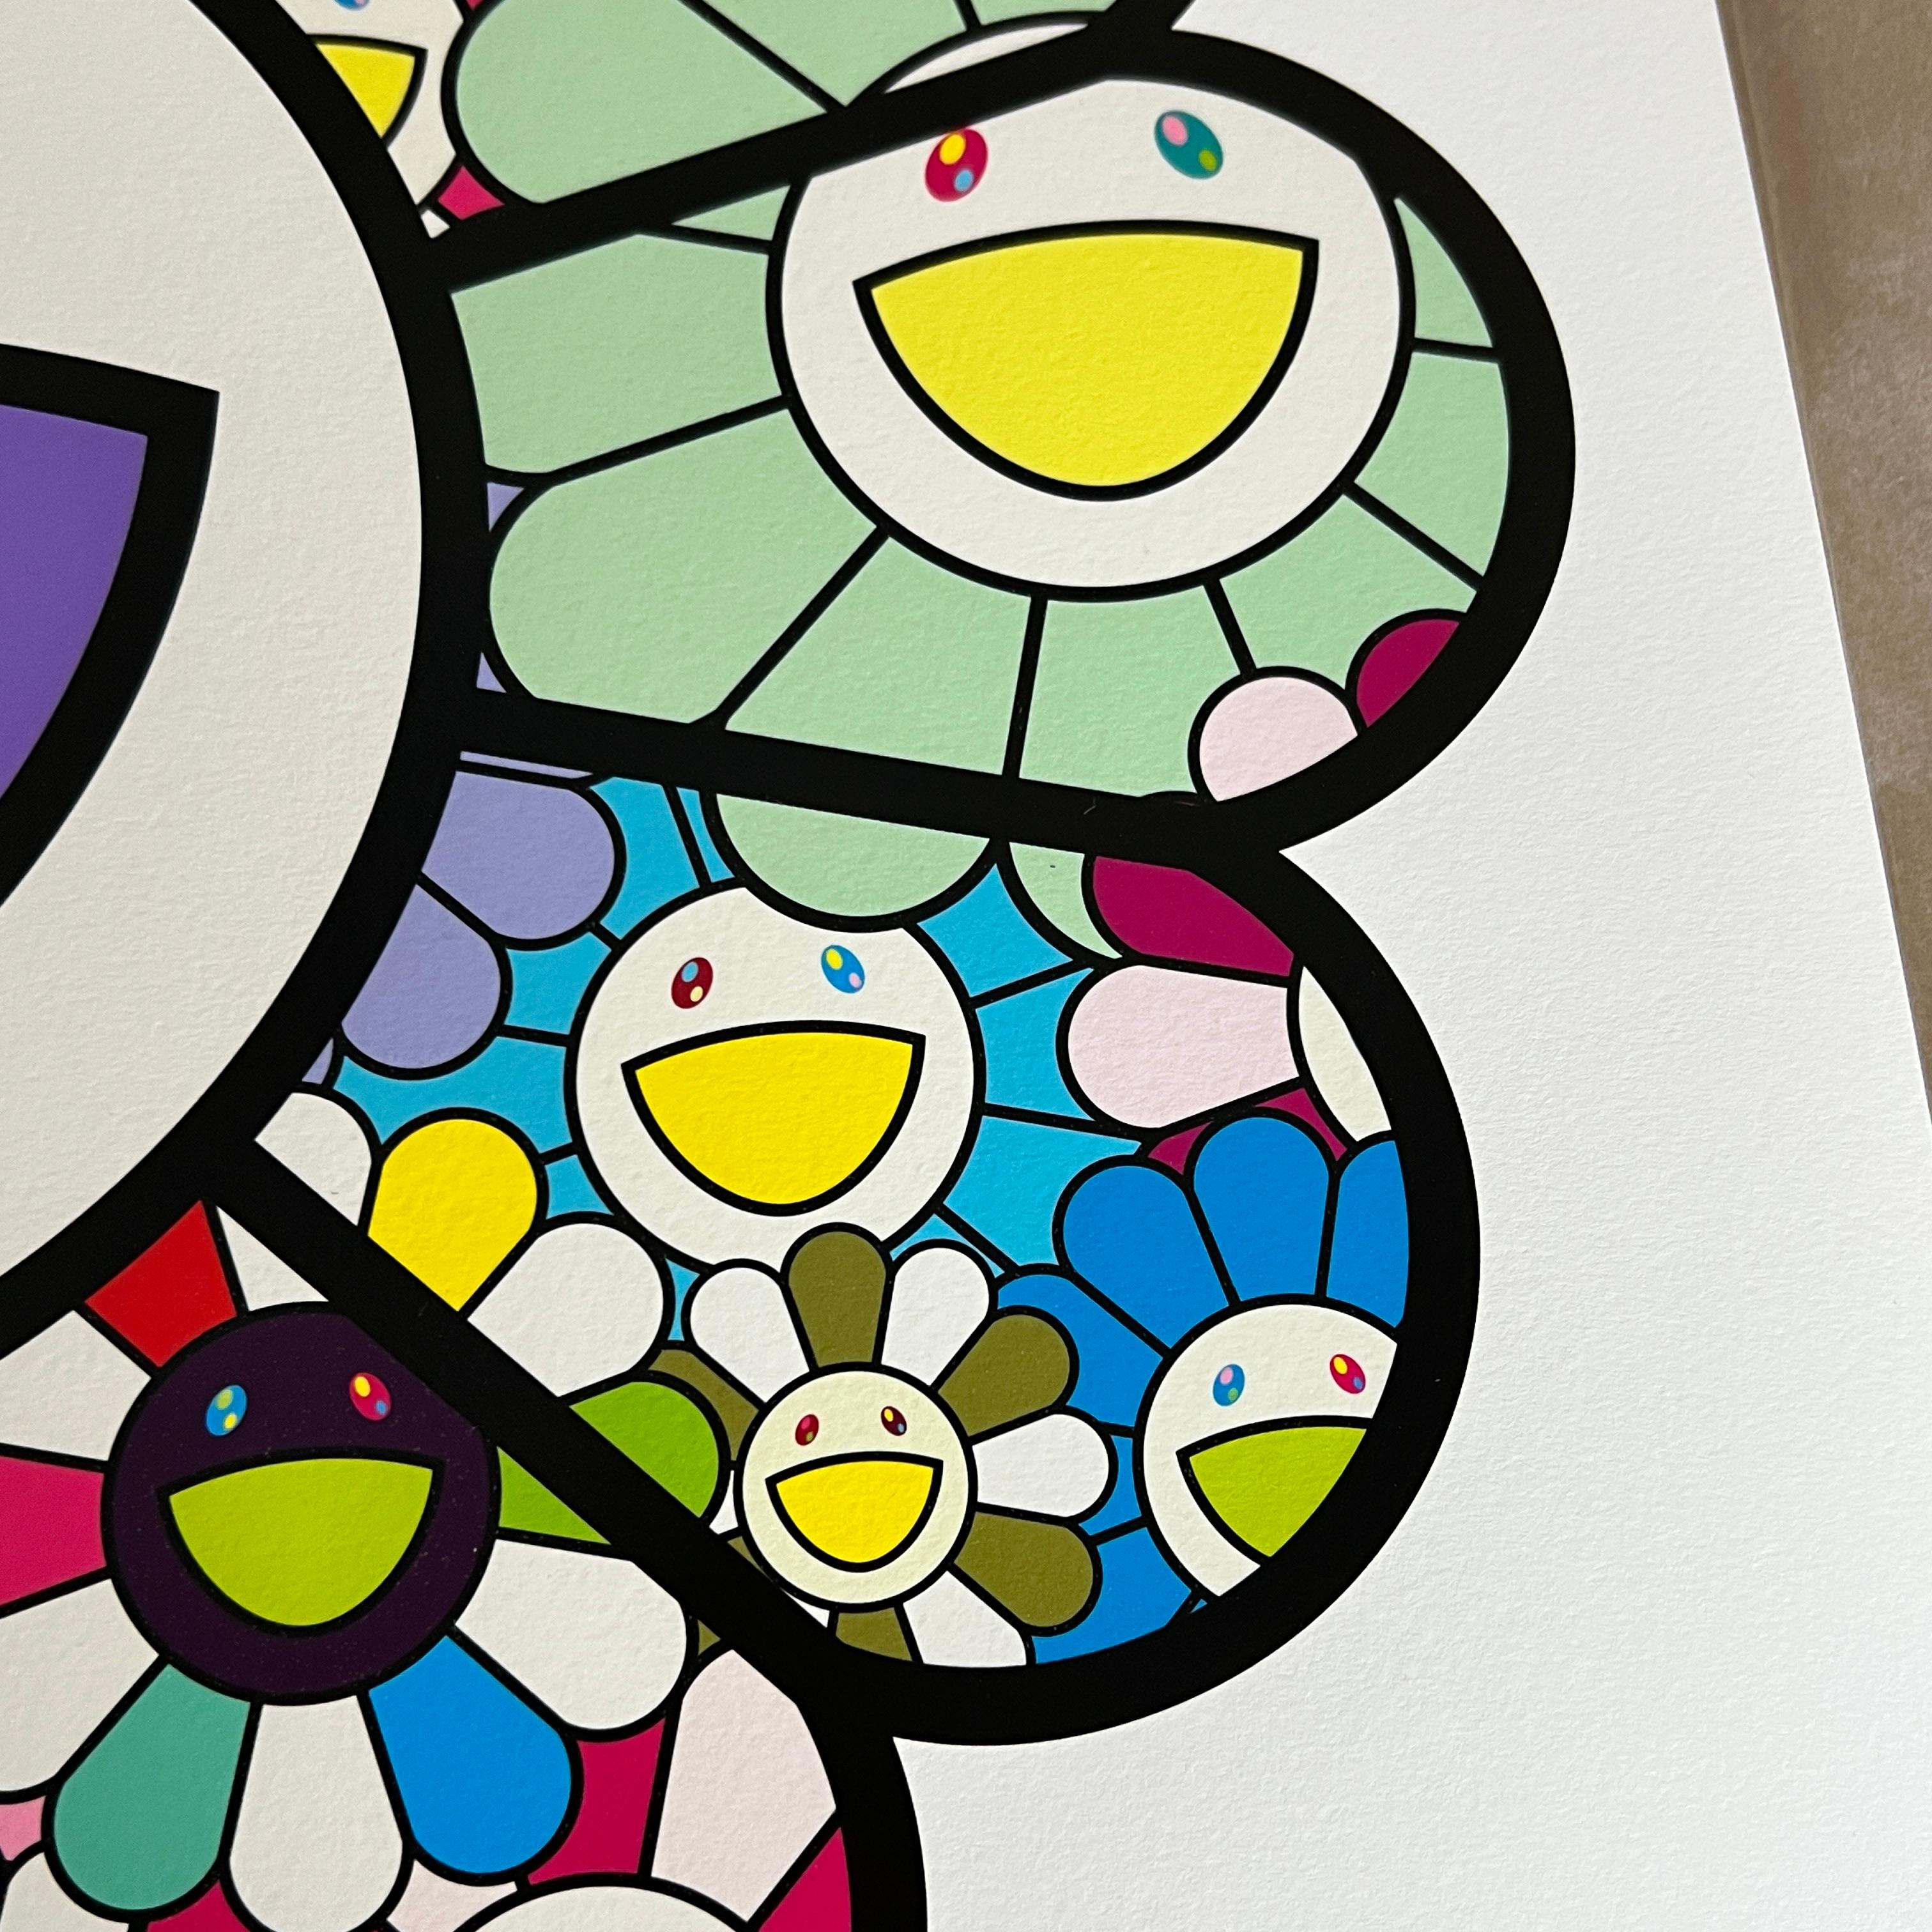 Artist: Takashi Murakami
Title: Yonaguni
Year: 2022
Edition: 100
Size: 500 x 500mm (sheet size)
Medium: Archival pigment print + Silkscreen

This is hand signed by Takashi Murakami.

Note: This will be shipped from Japan so the buyer is responsible